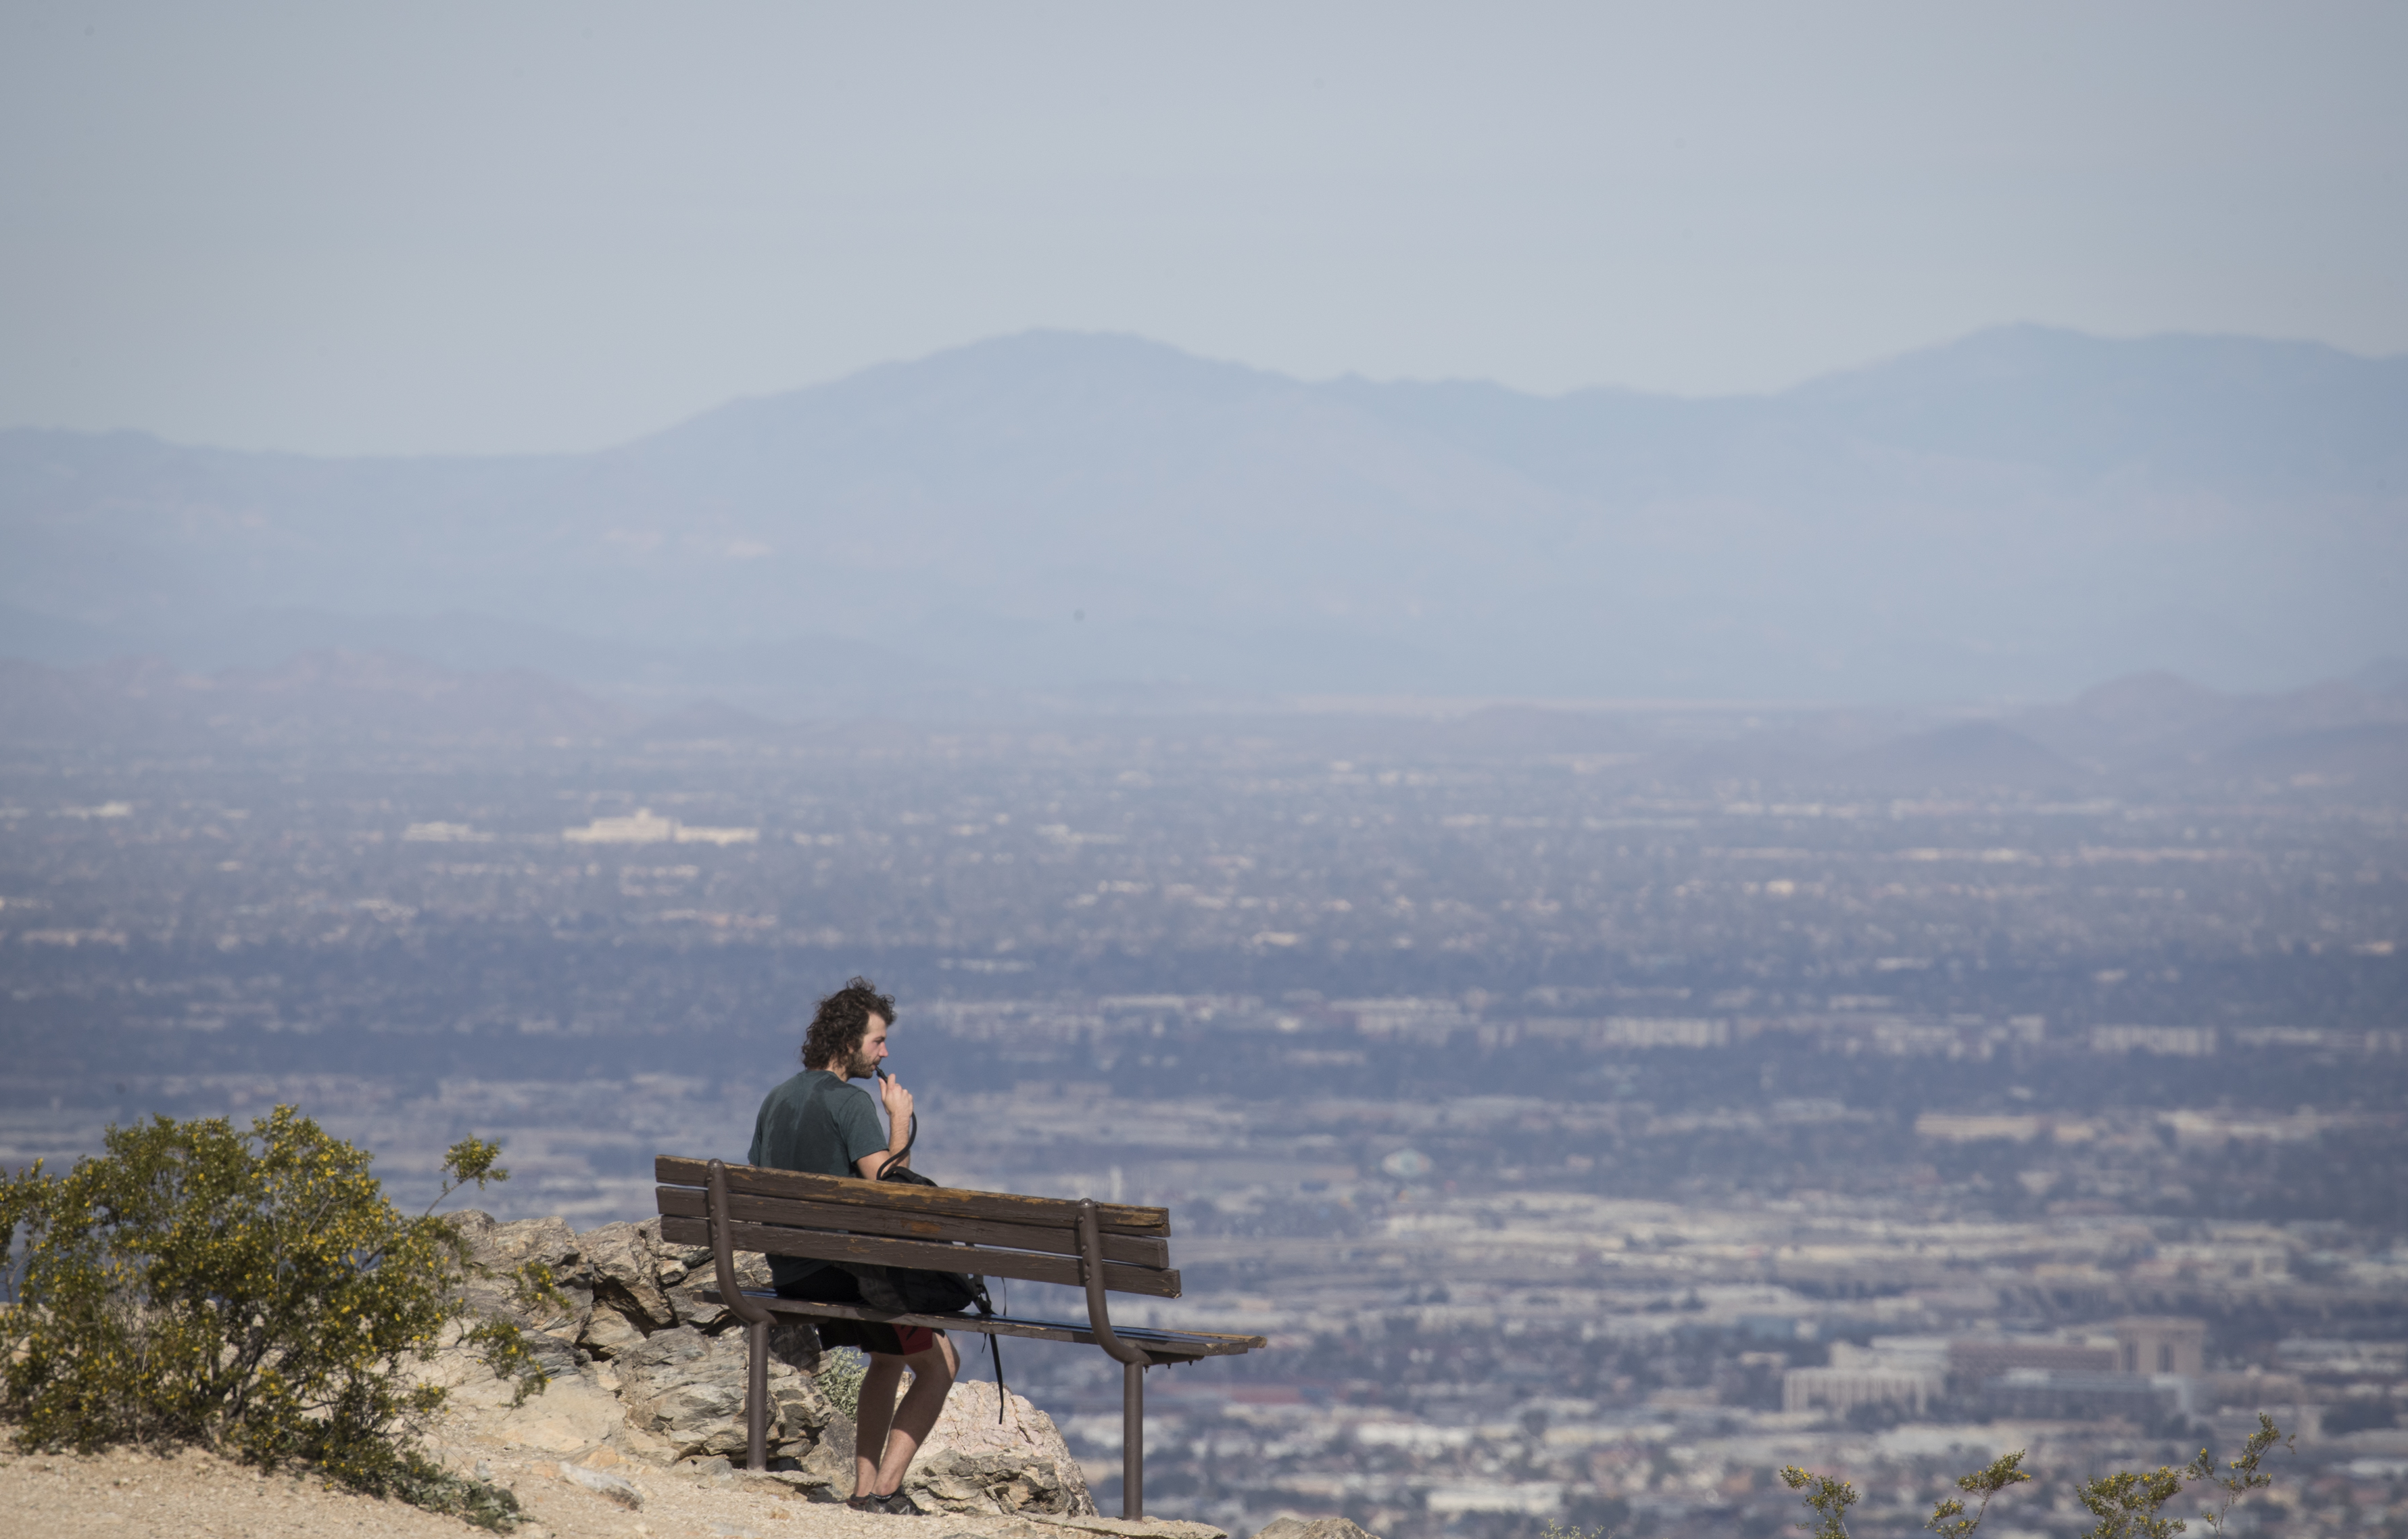 This Arizona spot has the best air quality in the US, study shows. Here's why